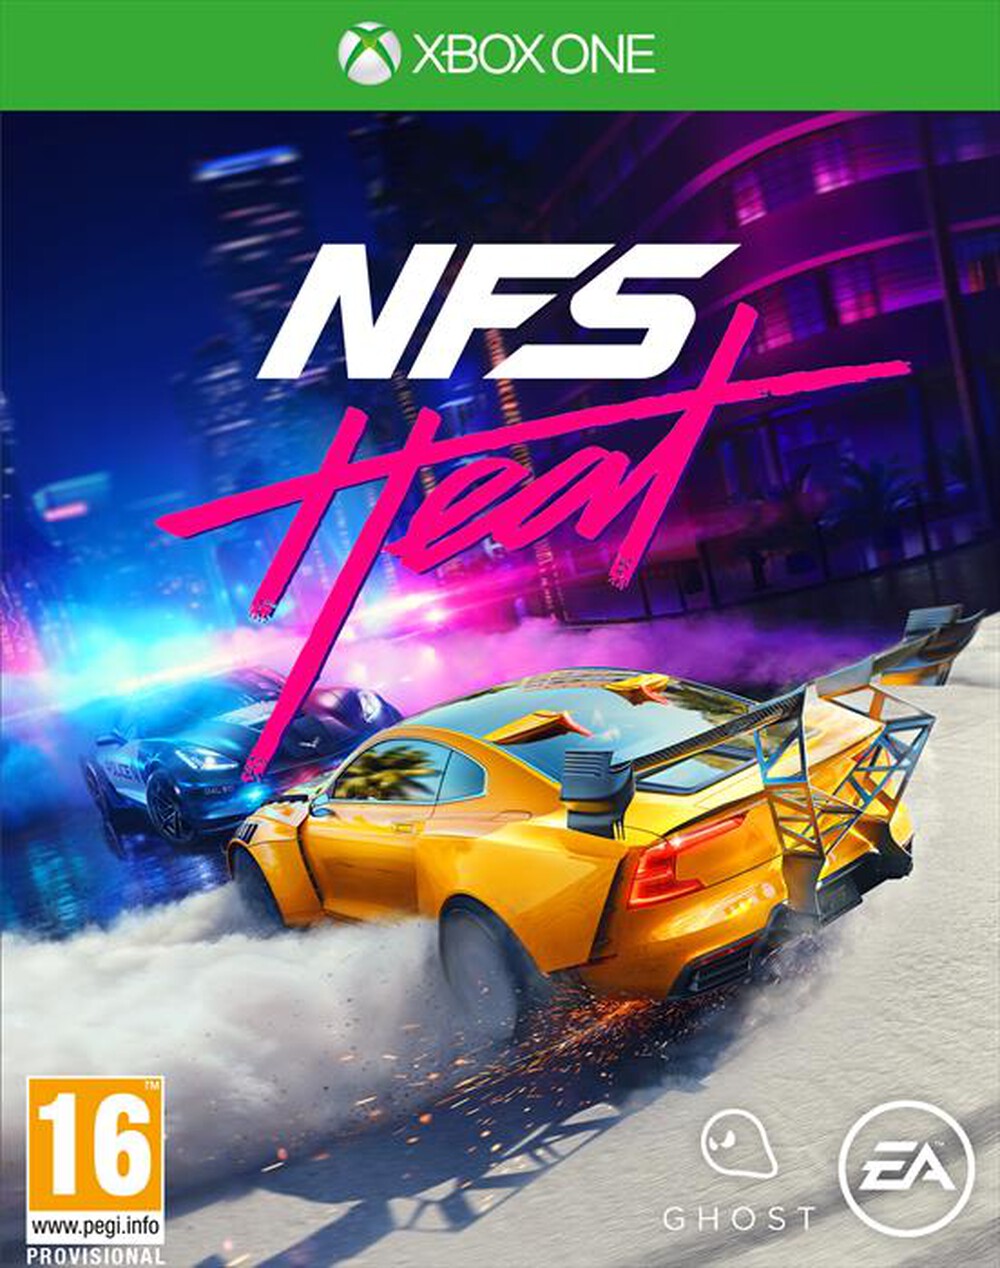 "ELECTRONIC ARTS - NEED FOR SPEED HEAT  XBOX ONE"